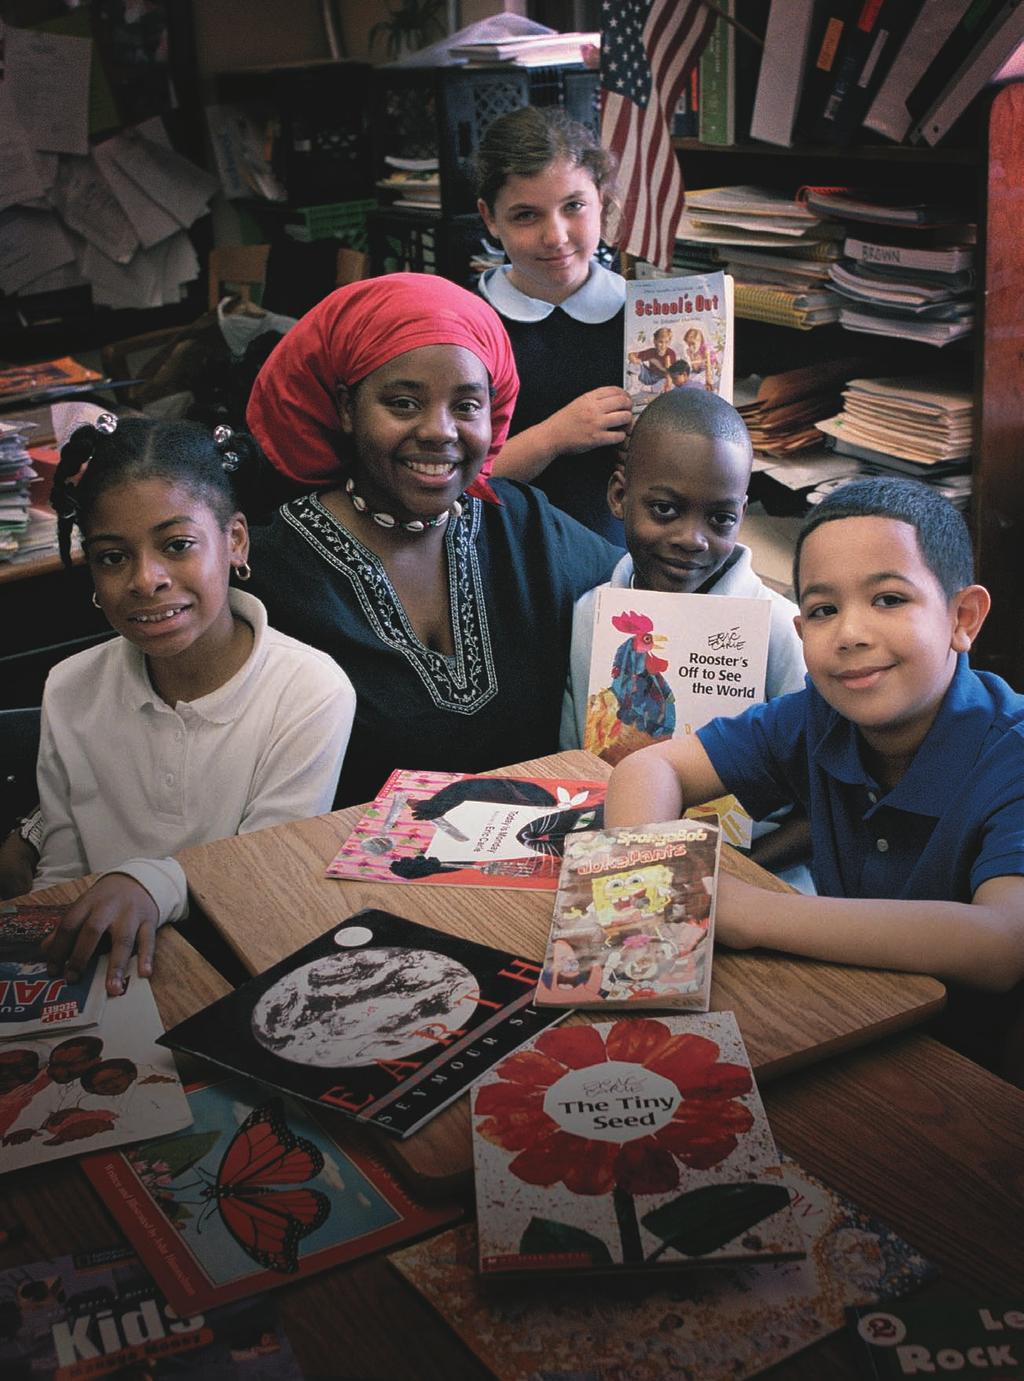 Kids are blown away by Books in Homes. We can make a massive difference.